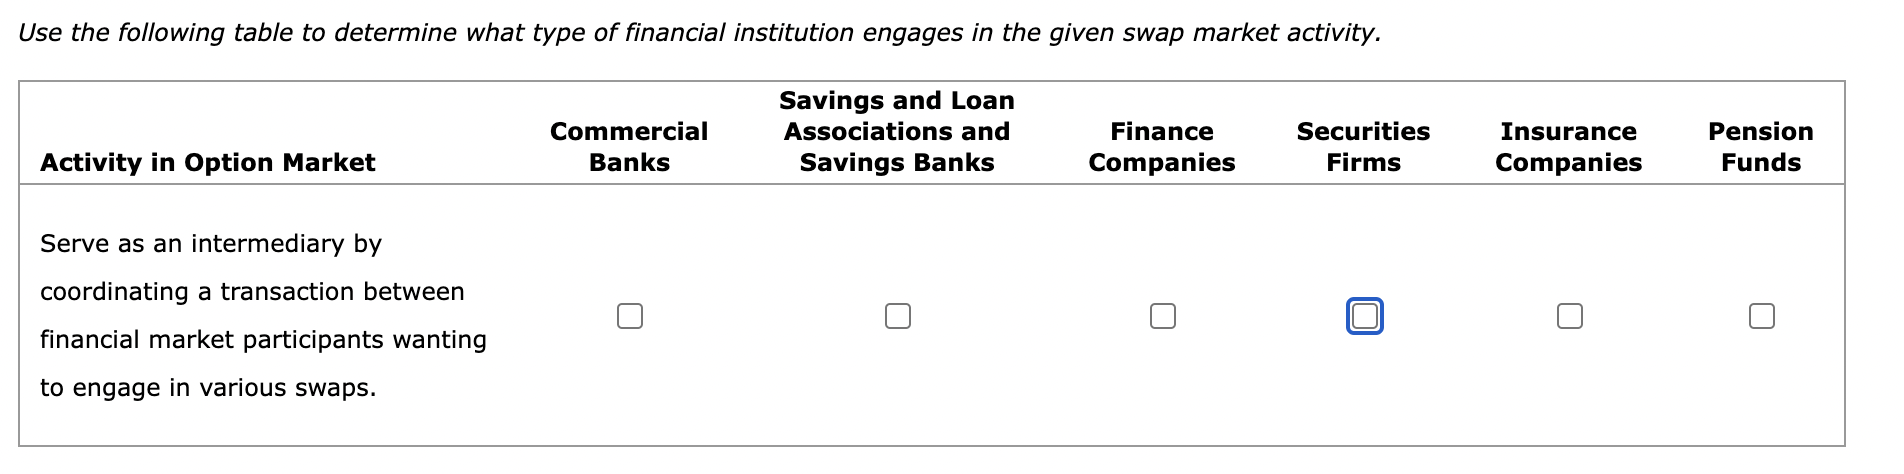 Use the following table to determine what type of financial institution engages in the given swap market